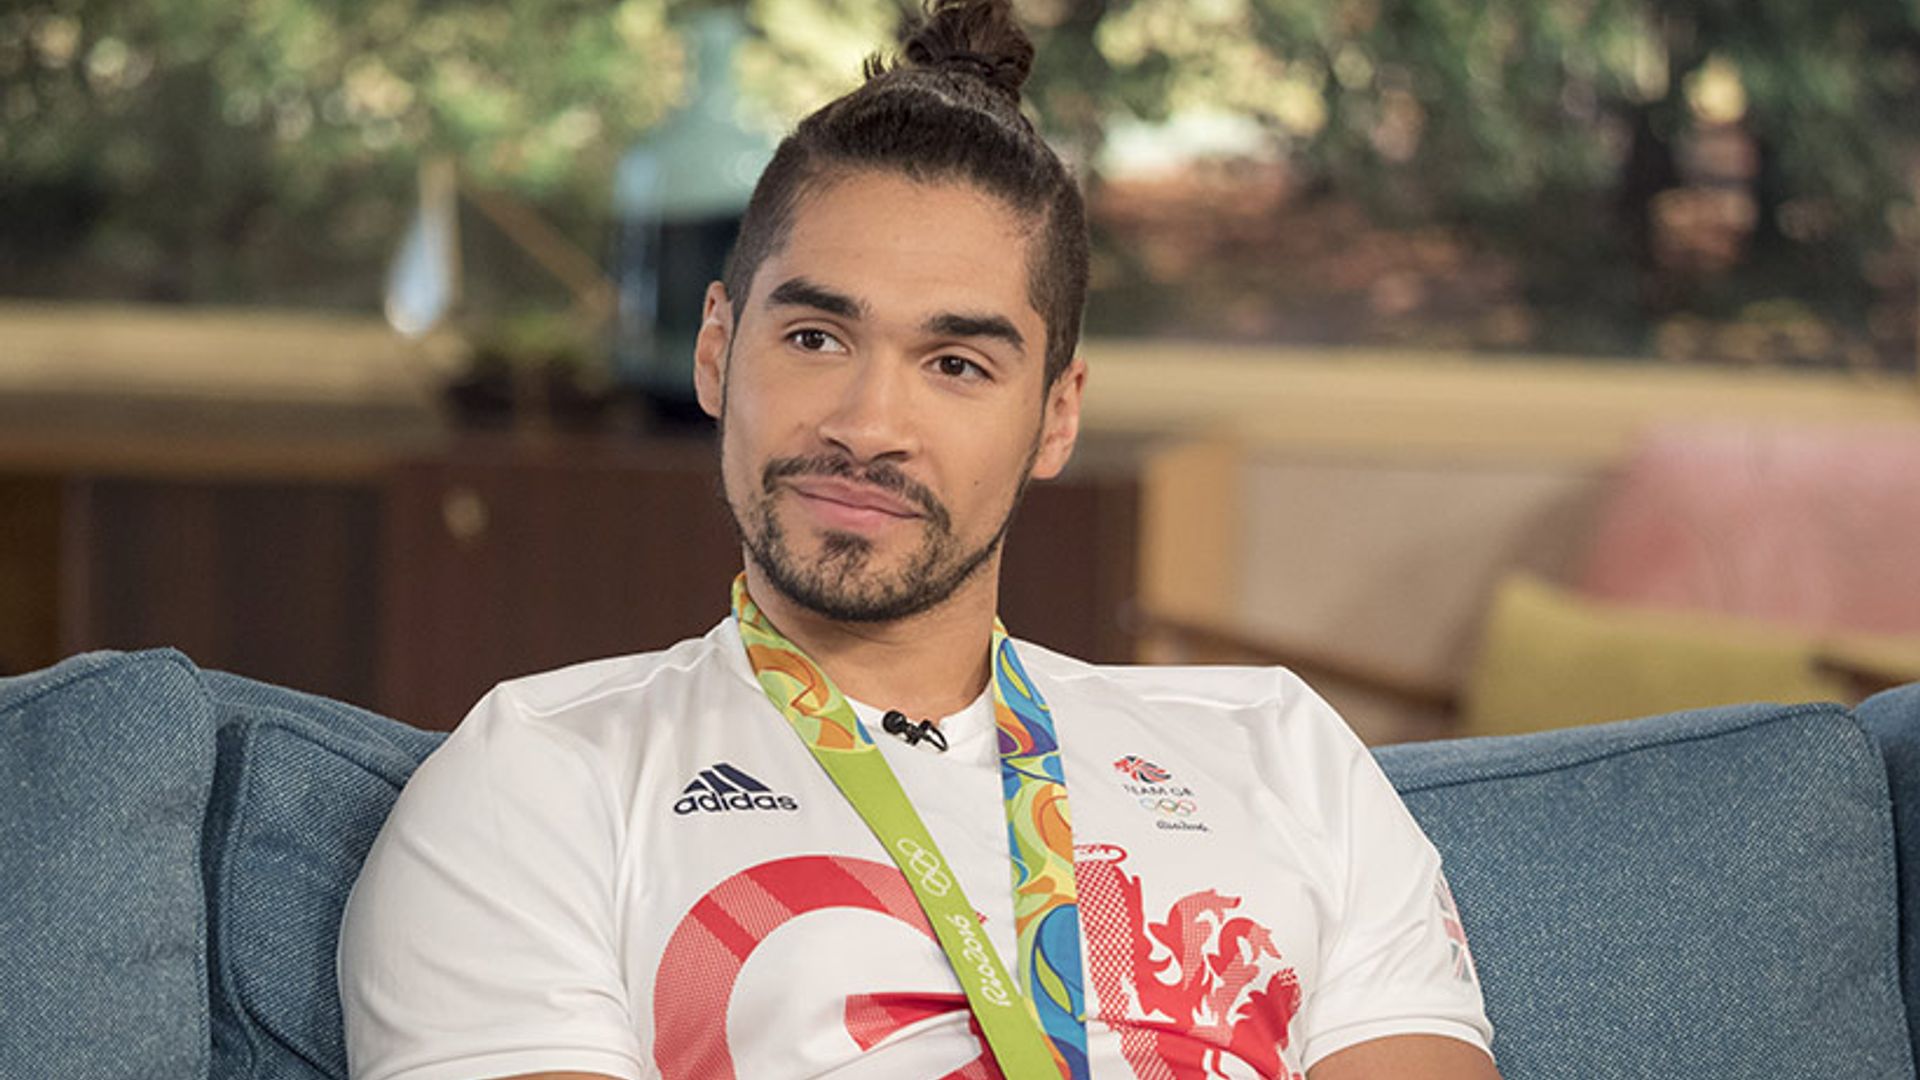 Louis Smith defends his reaction at Rio Games: 'I just needed a minute to let that sink in'